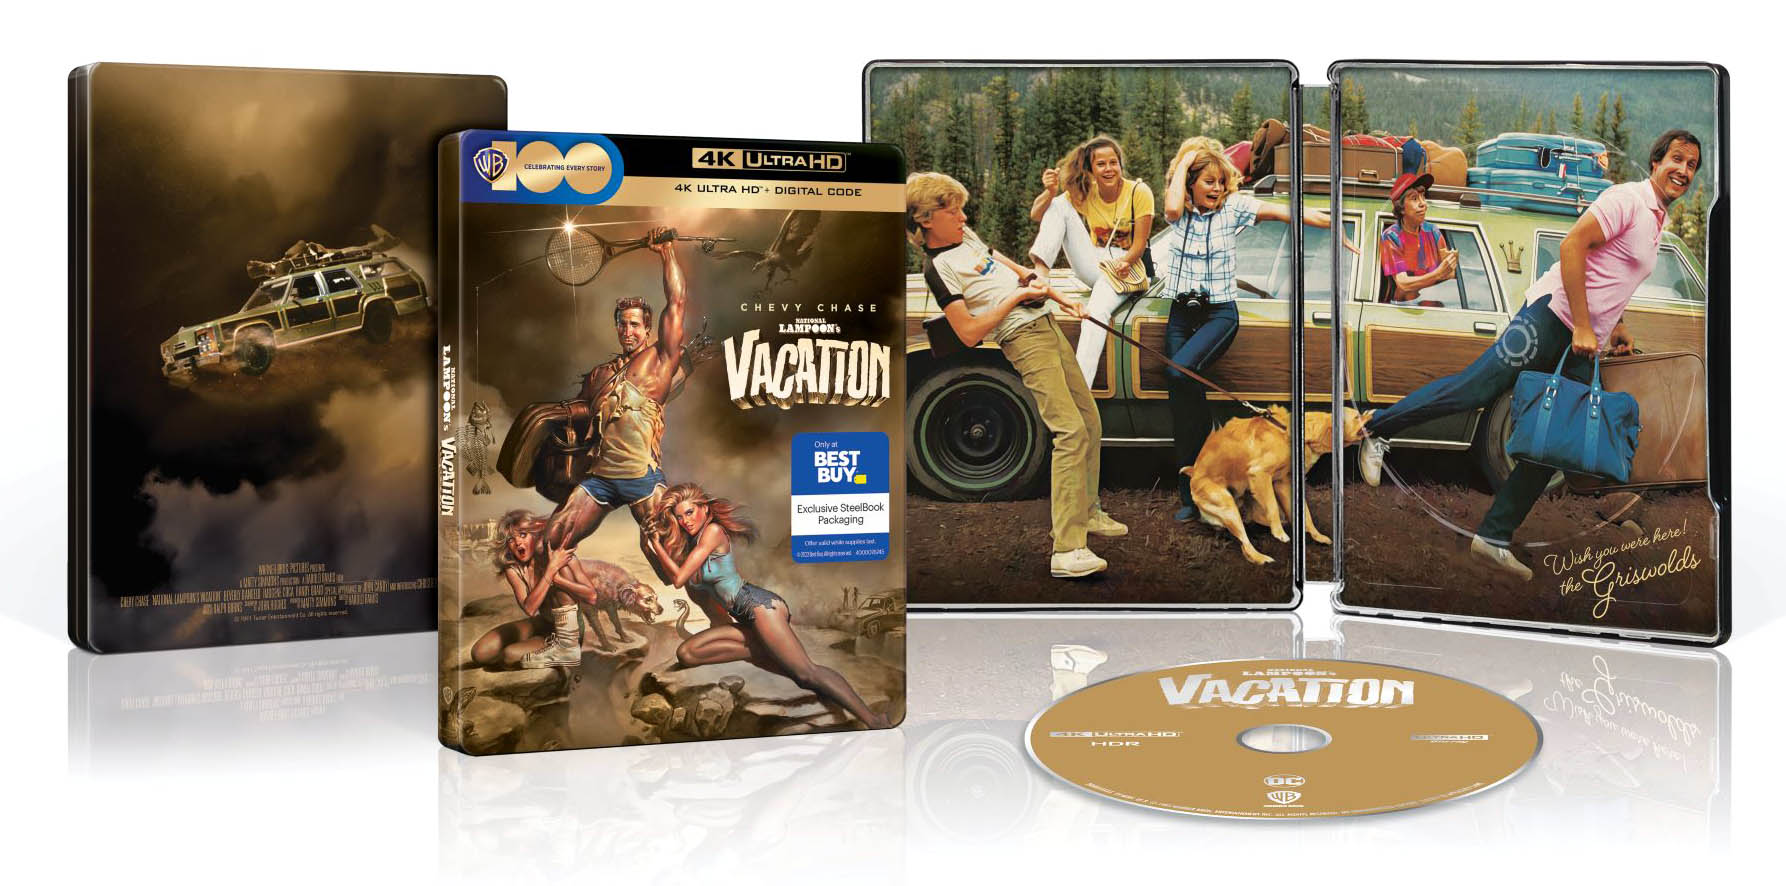 National Lampoons Vacation 4k Blu-ray WB100 SteelBook